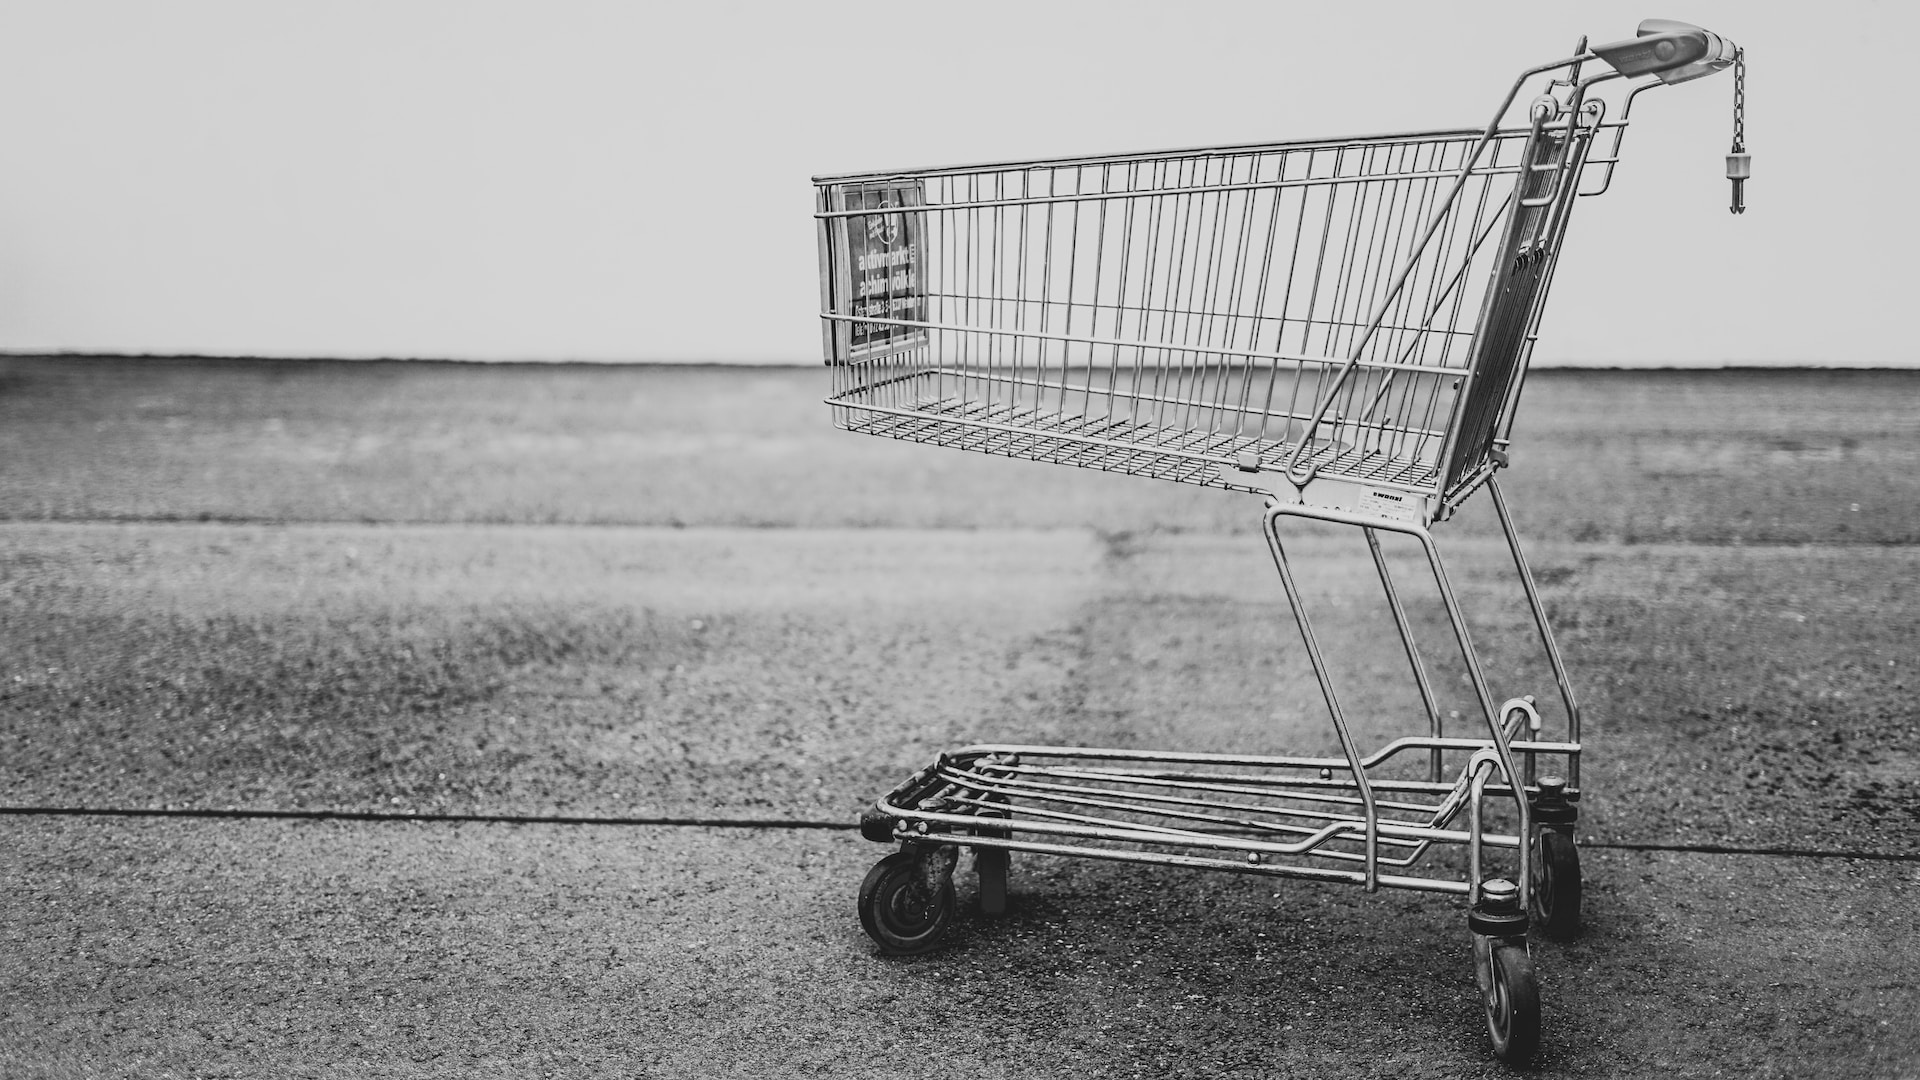 shopping cart-demonstrating-From likes to sales: social commerce is giving eCommerce a run for its money.